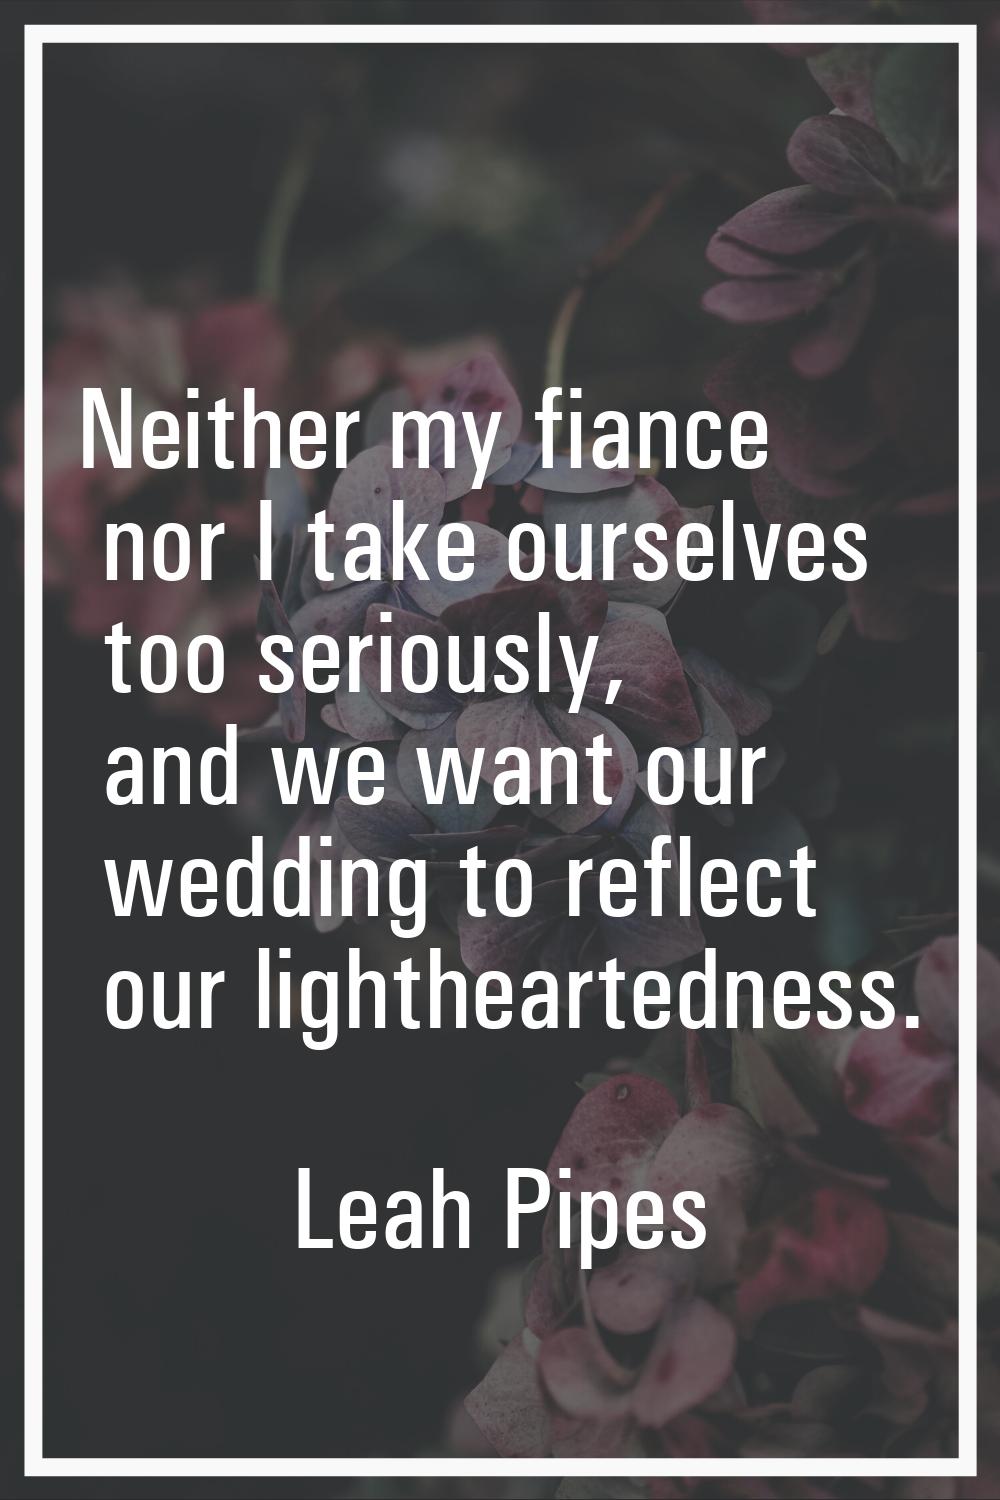 Neither my fiance nor I take ourselves too seriously, and we want our wedding to reflect our lighth